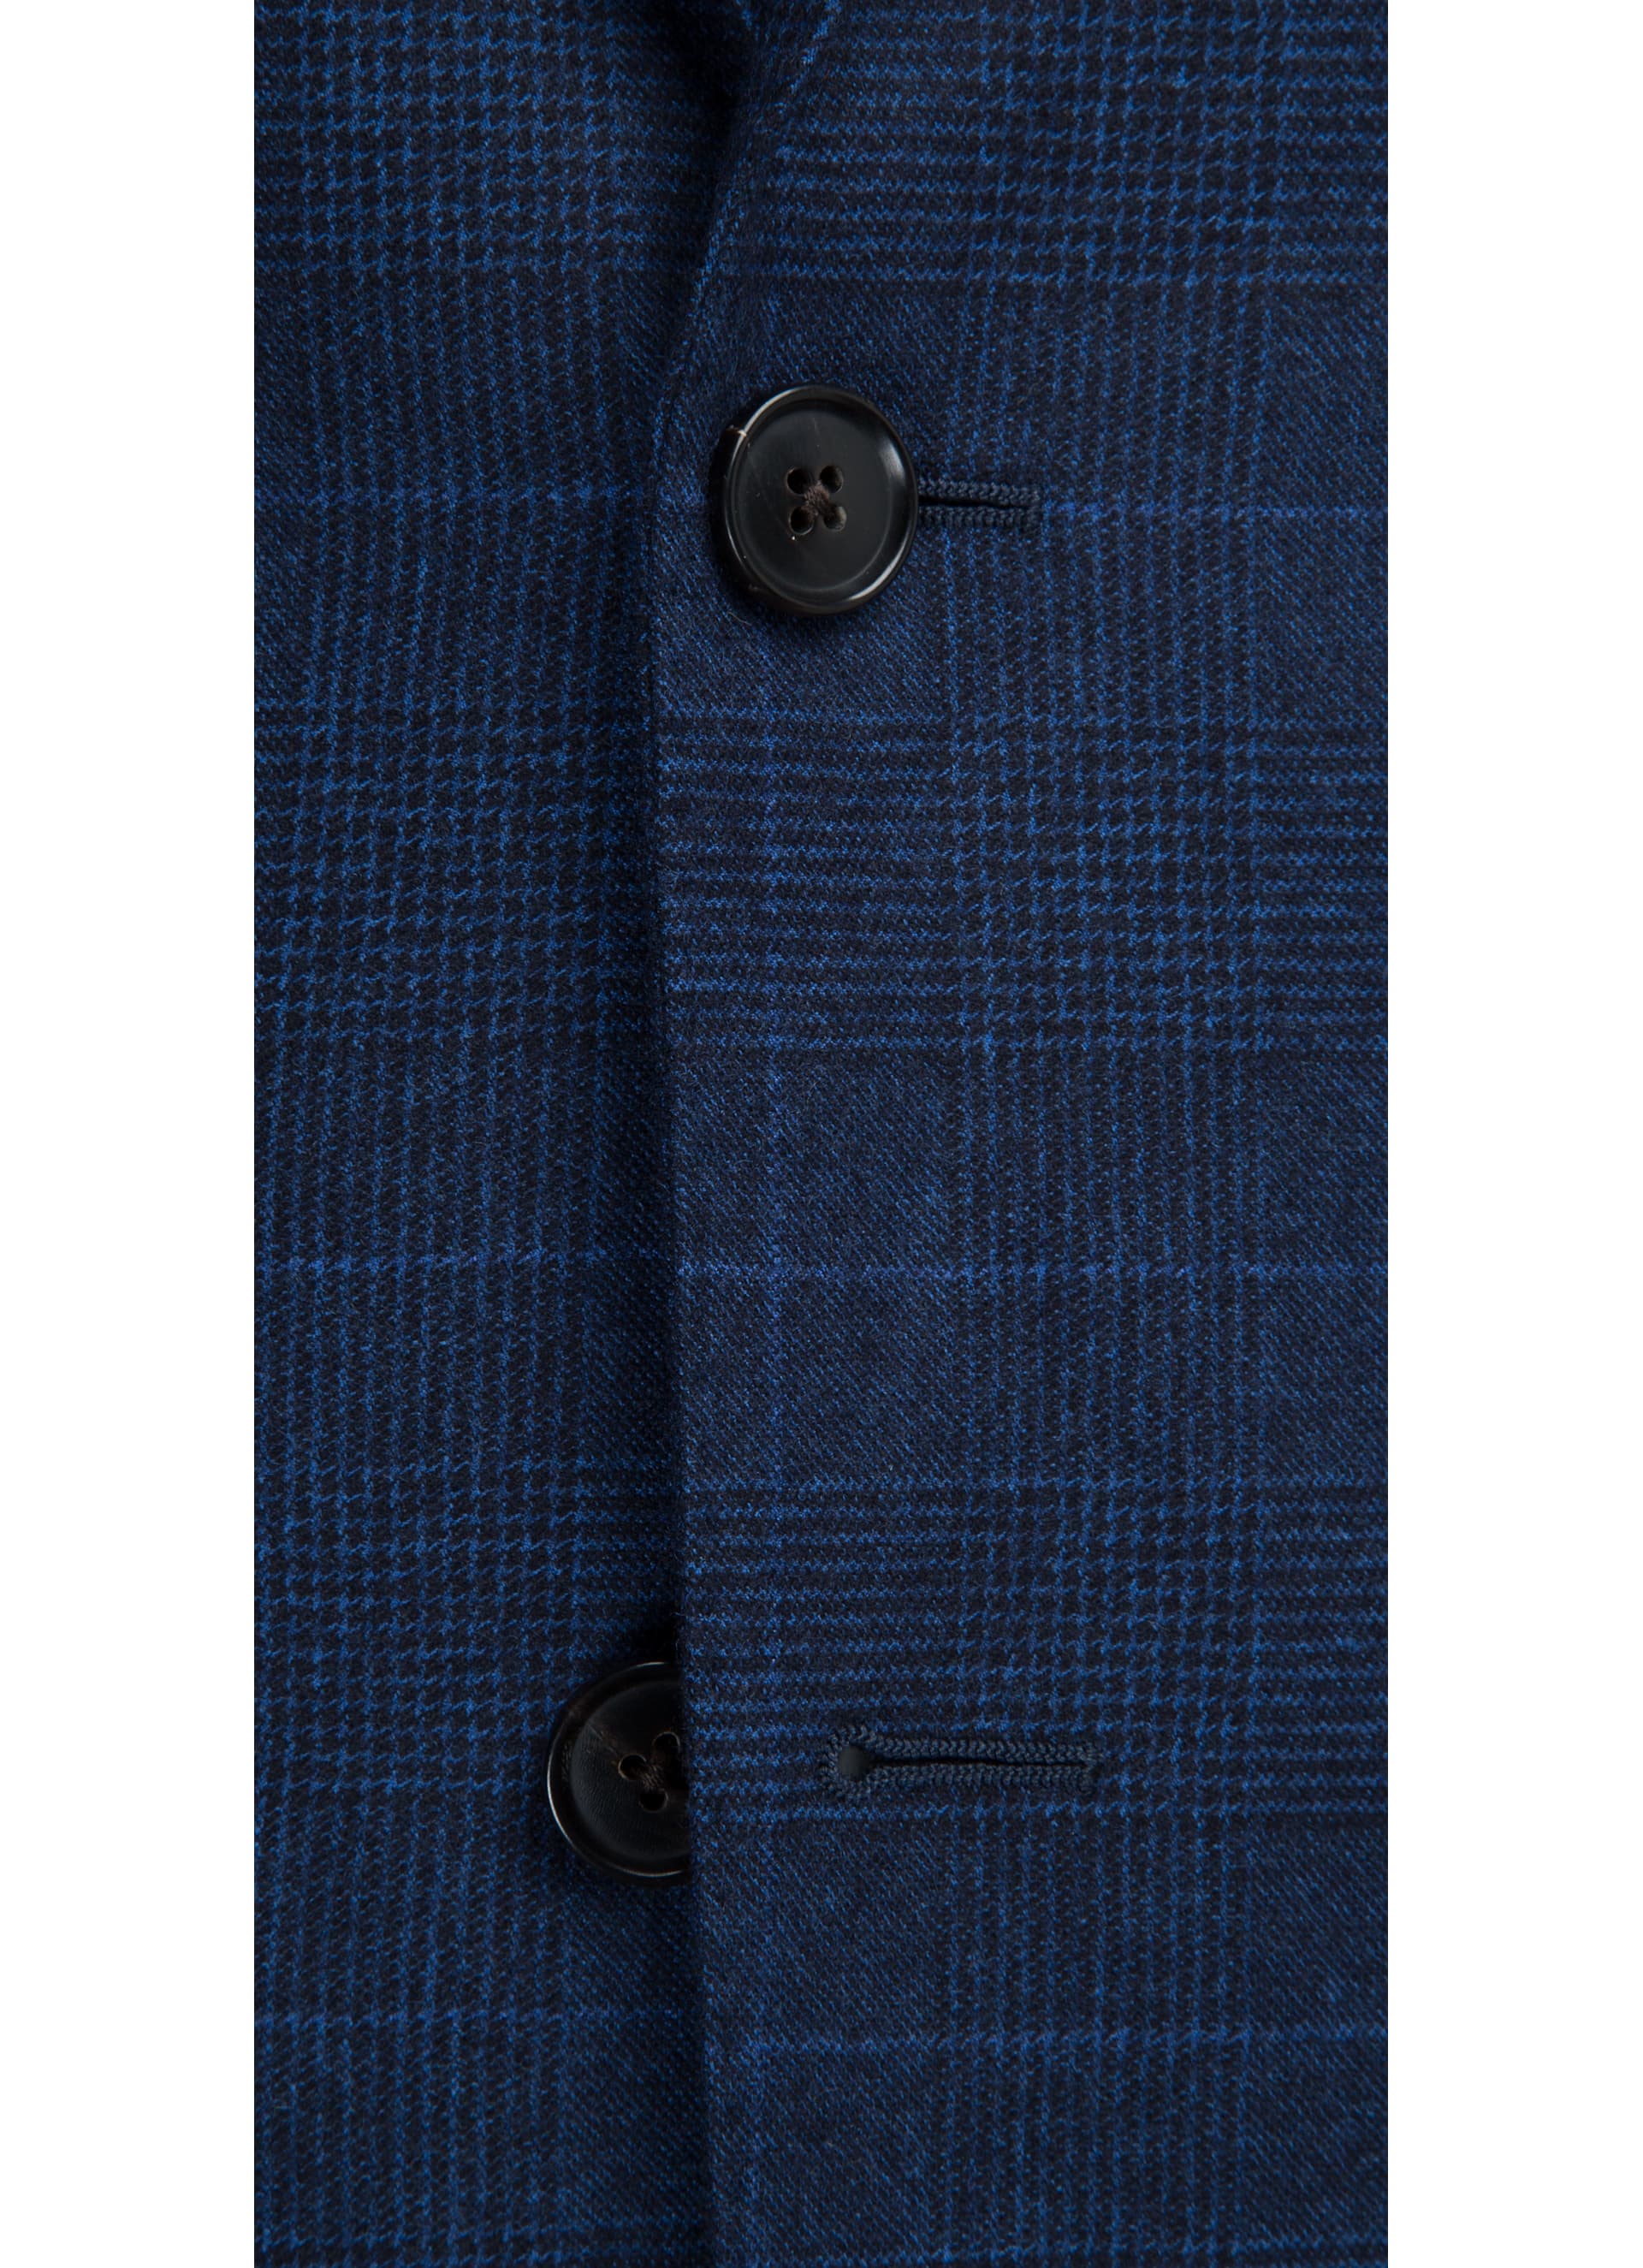 Suit Blue Check Sienna P4905i | Suitsupply Online Store